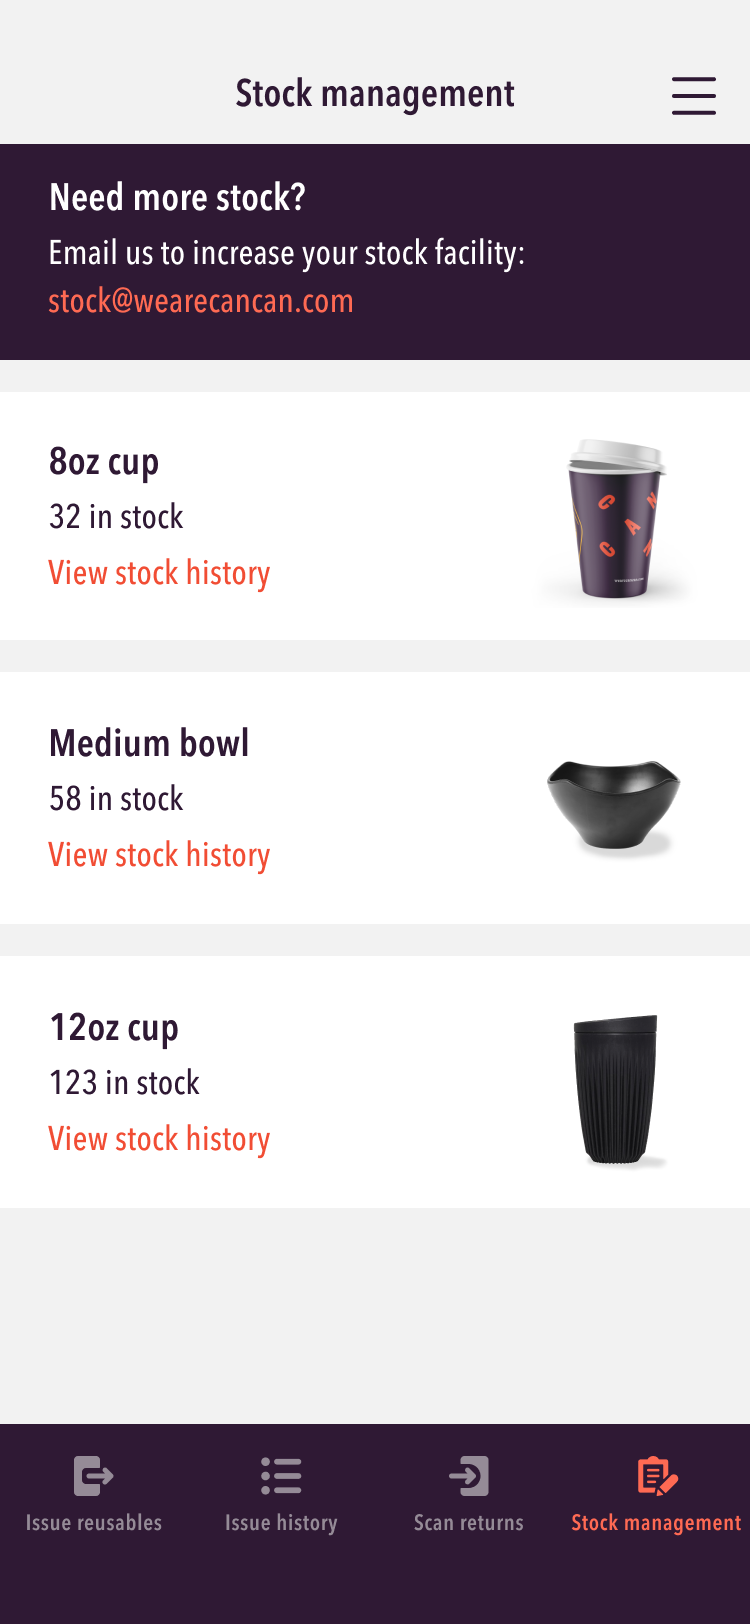 The stock management screen from the trader app, showing stock levels for two types of cup and a bowl.